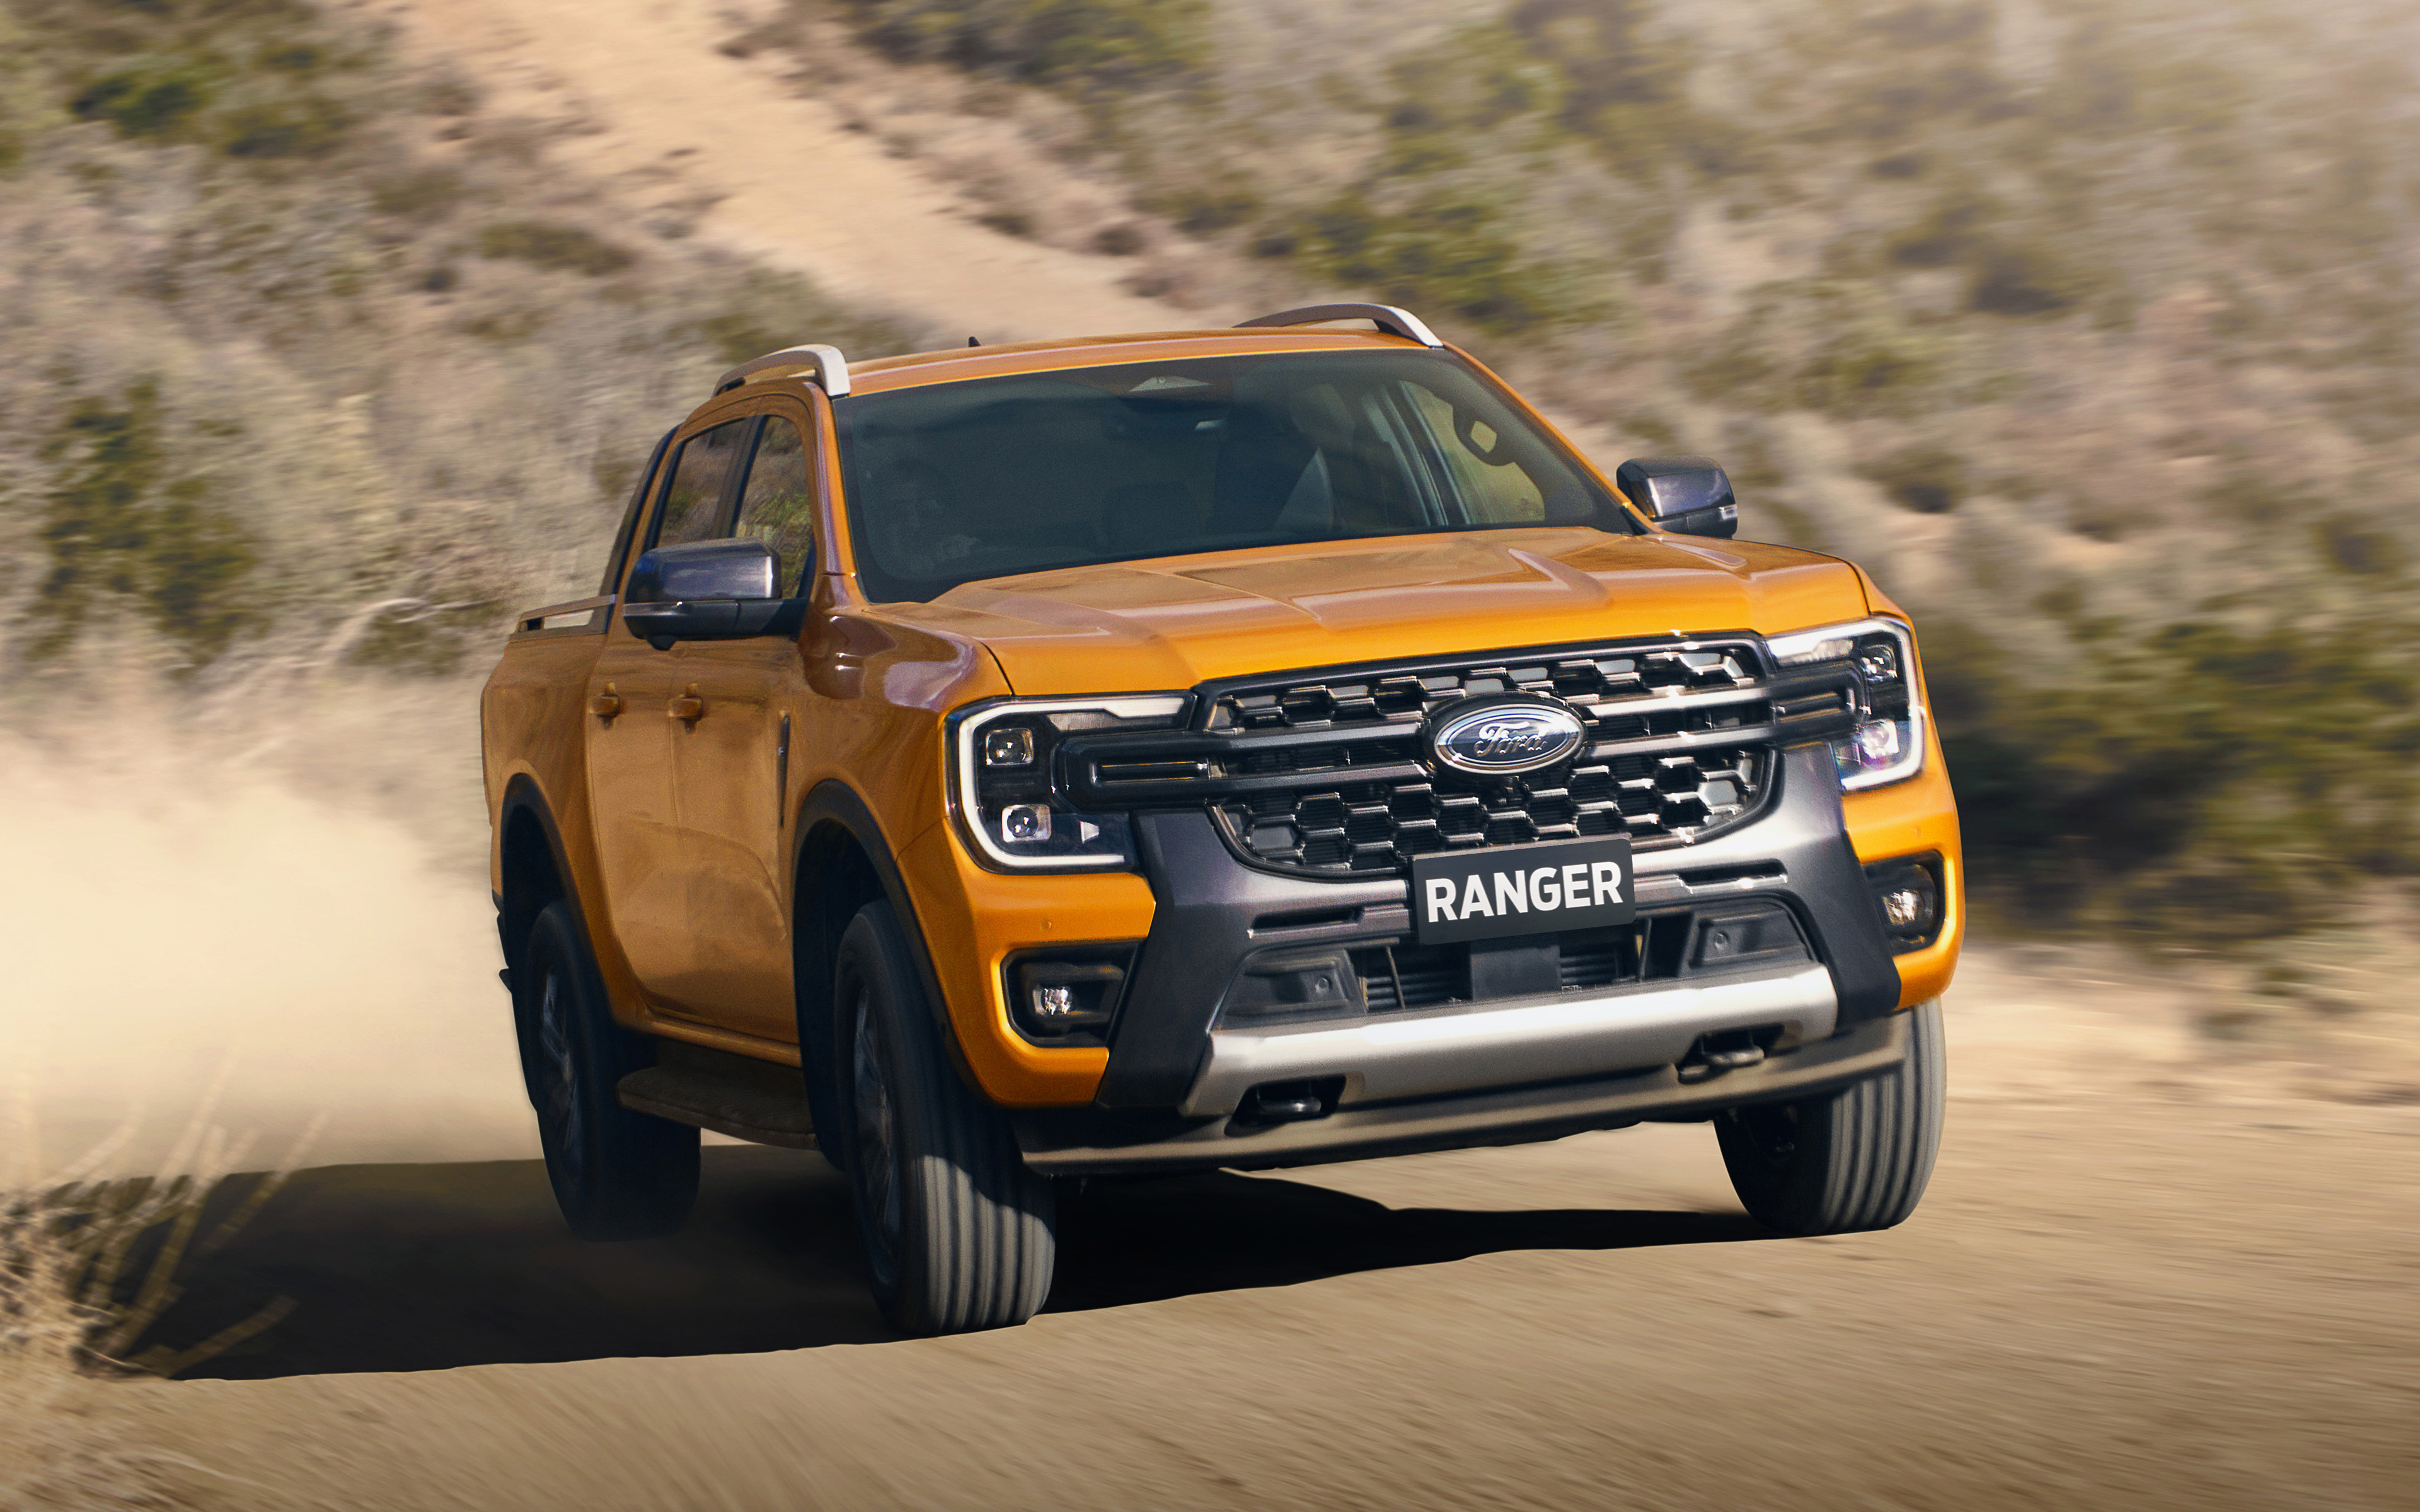 Download wallpaper Ford Ranger Wildtrak, 4k, exterior, front view, new yellow Ranger Wildtrack, American cars, Australian version, Ford for desktop with resolution 3840x2400. High Quality HD picture wallpaper